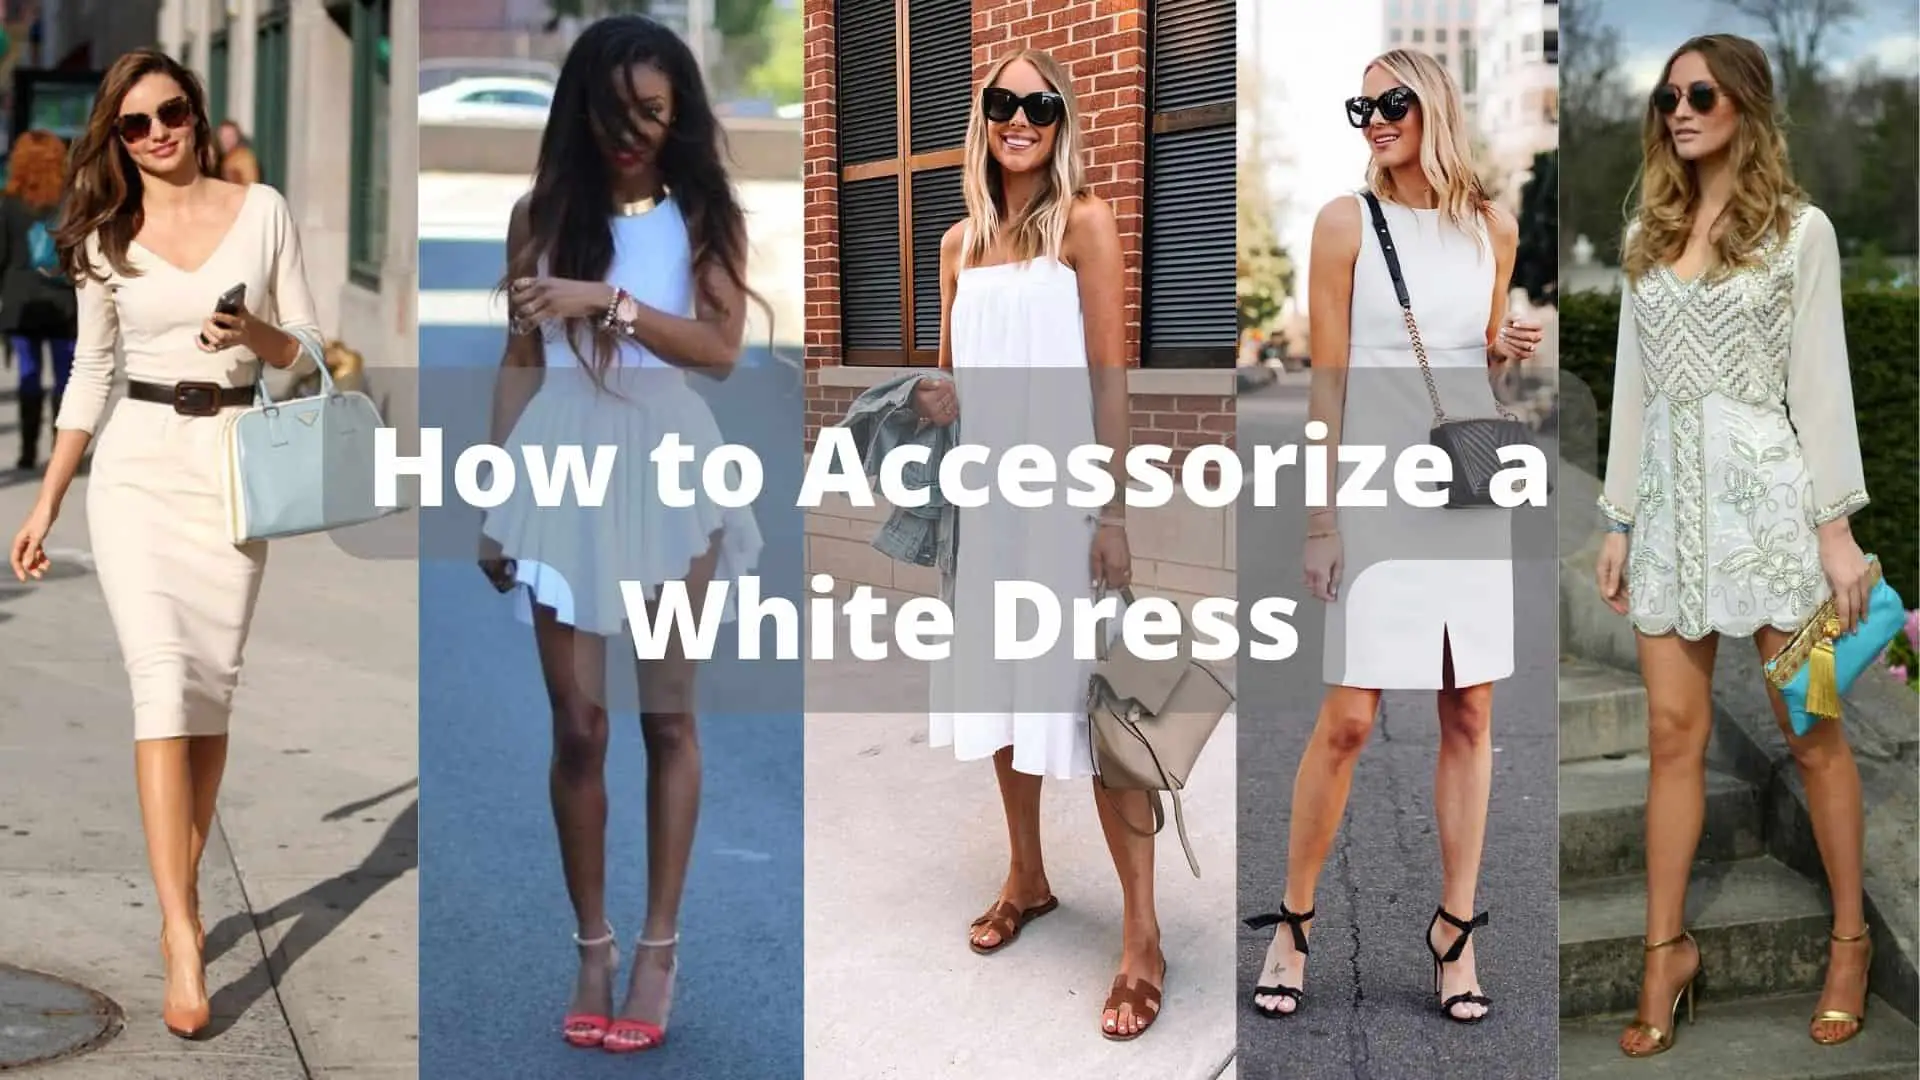 How to Accessorize a White Dress